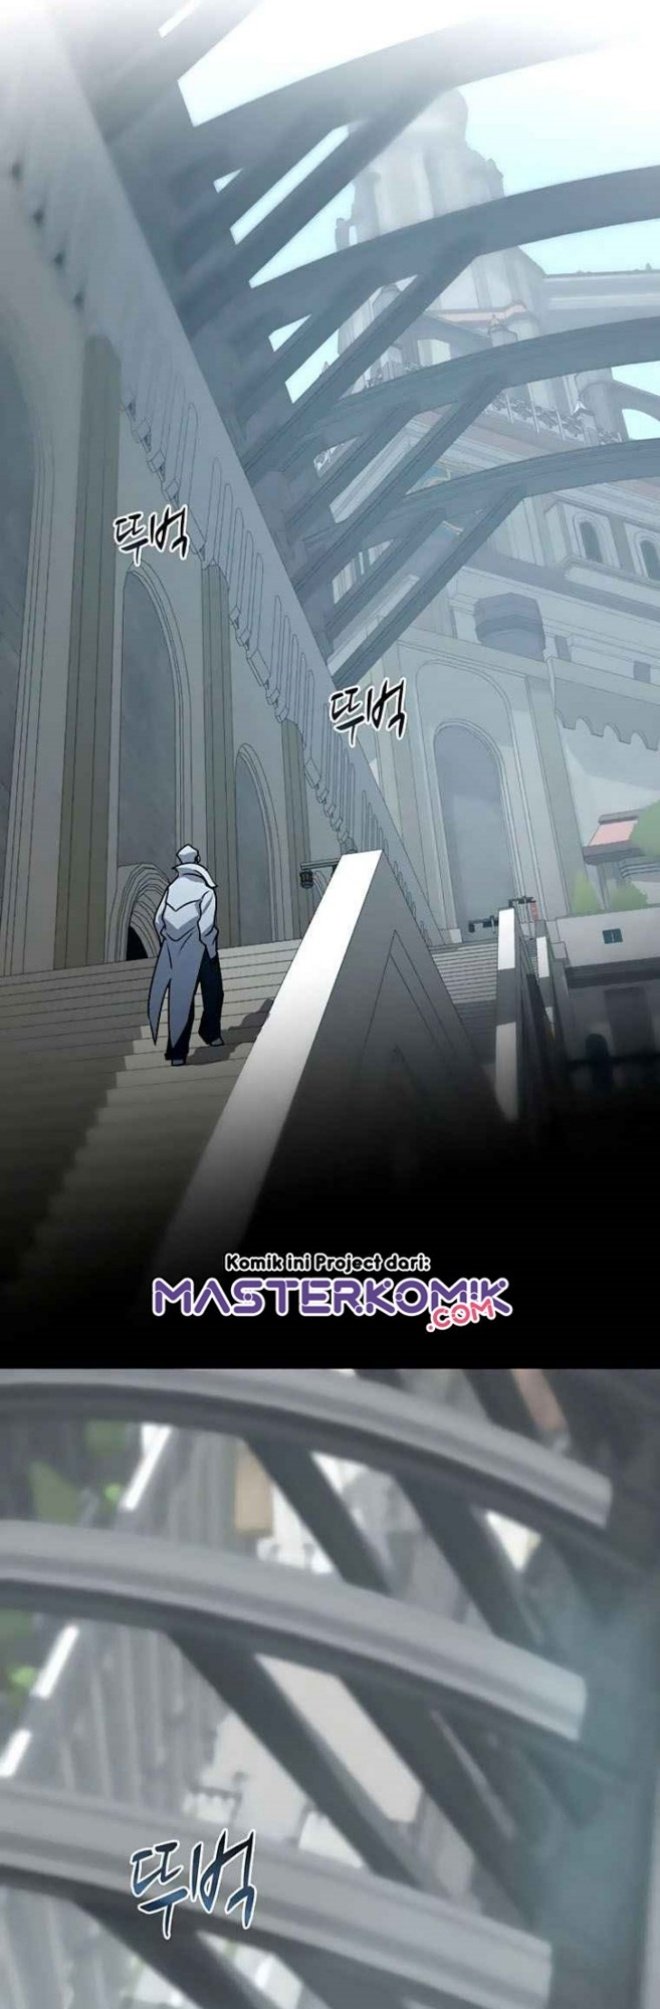 Book Eater Chapter 43 End